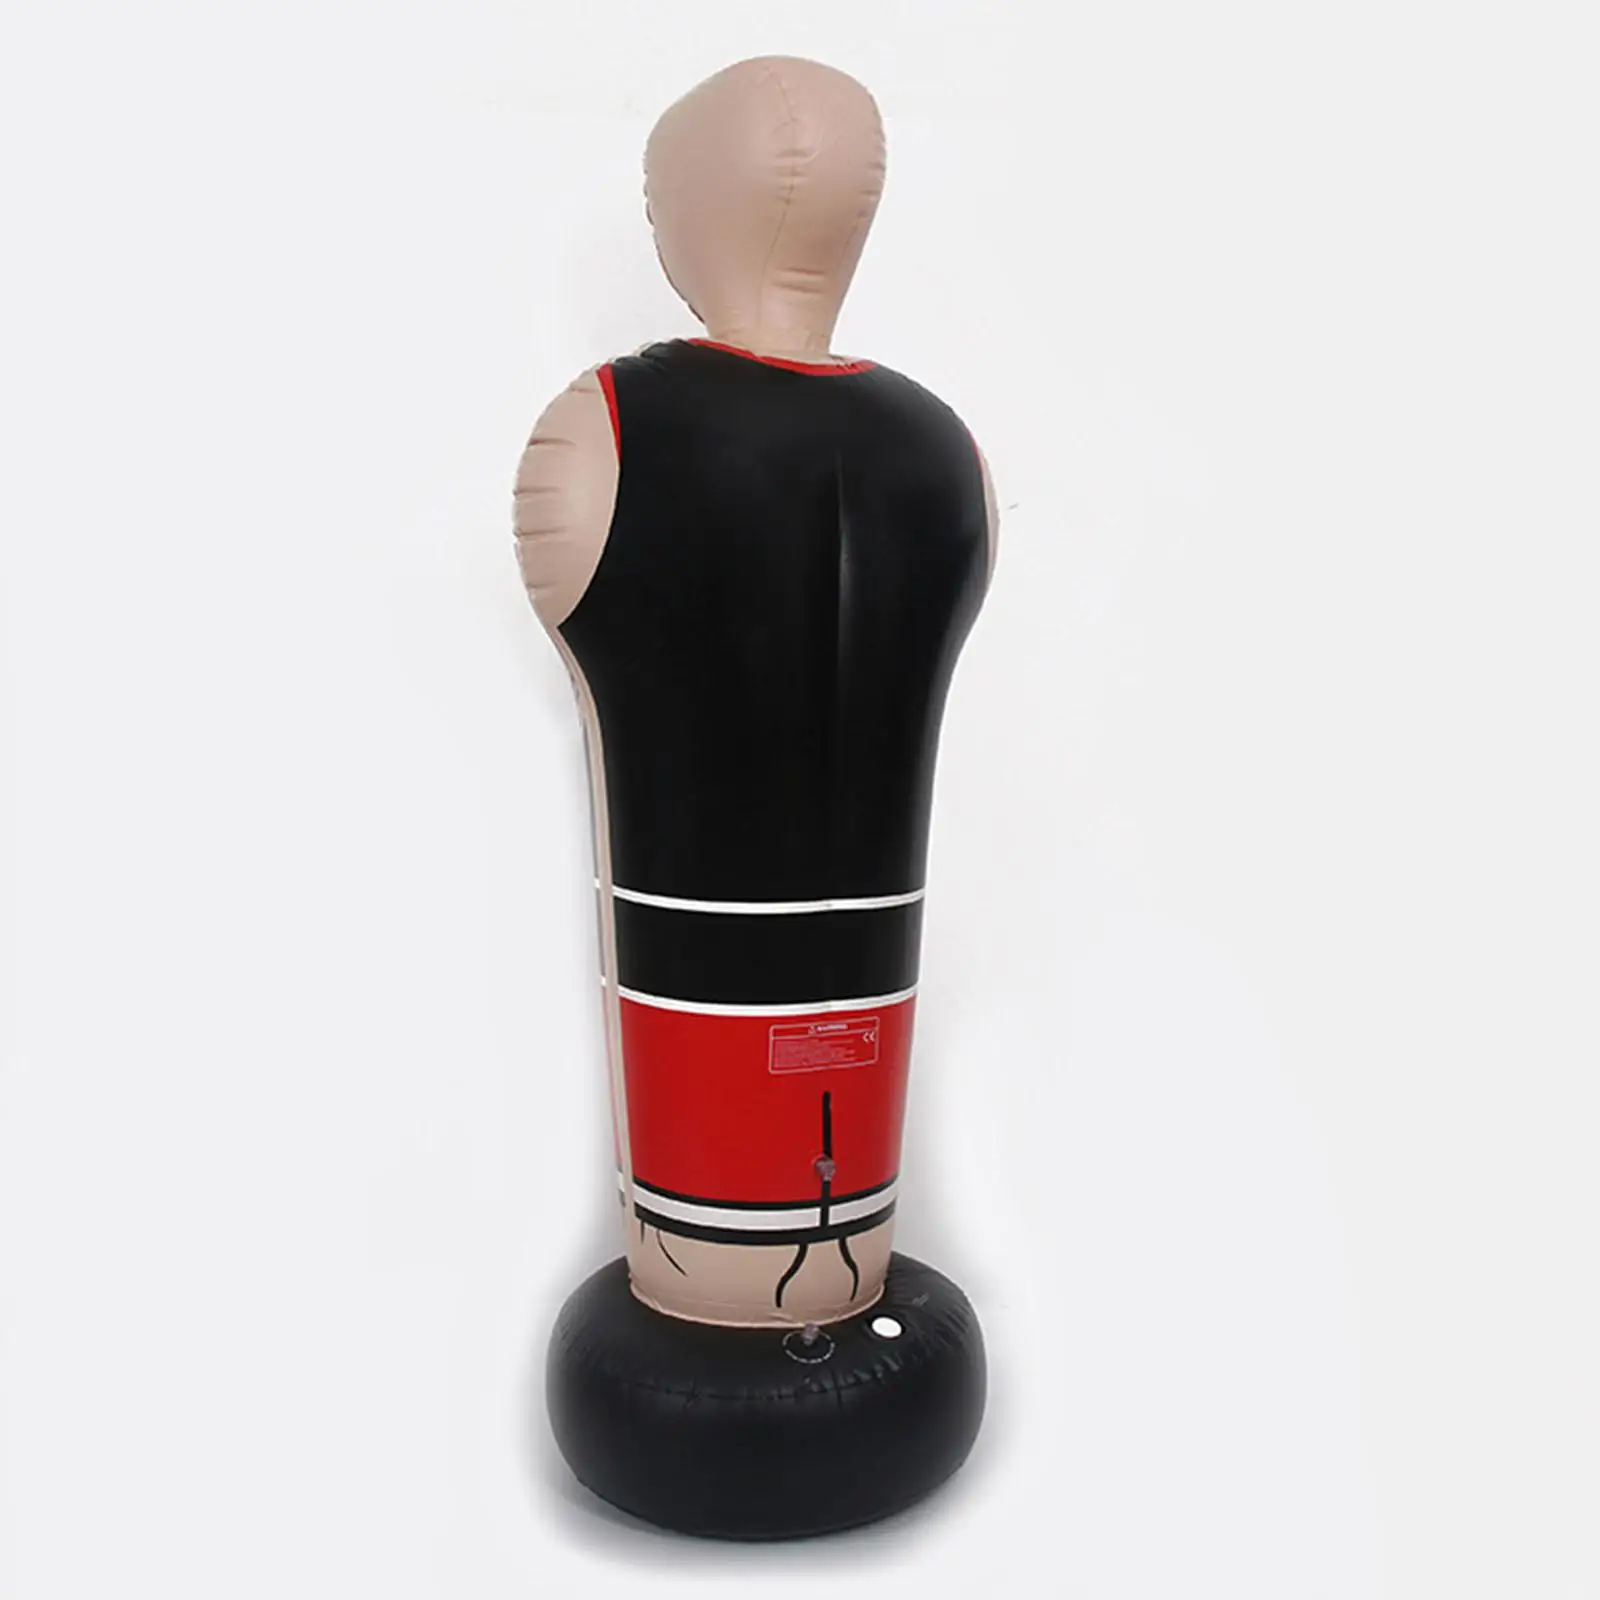 Inflatable Punching Bag Fitness Tool Mma Boxing Target Bag for Kids Teens